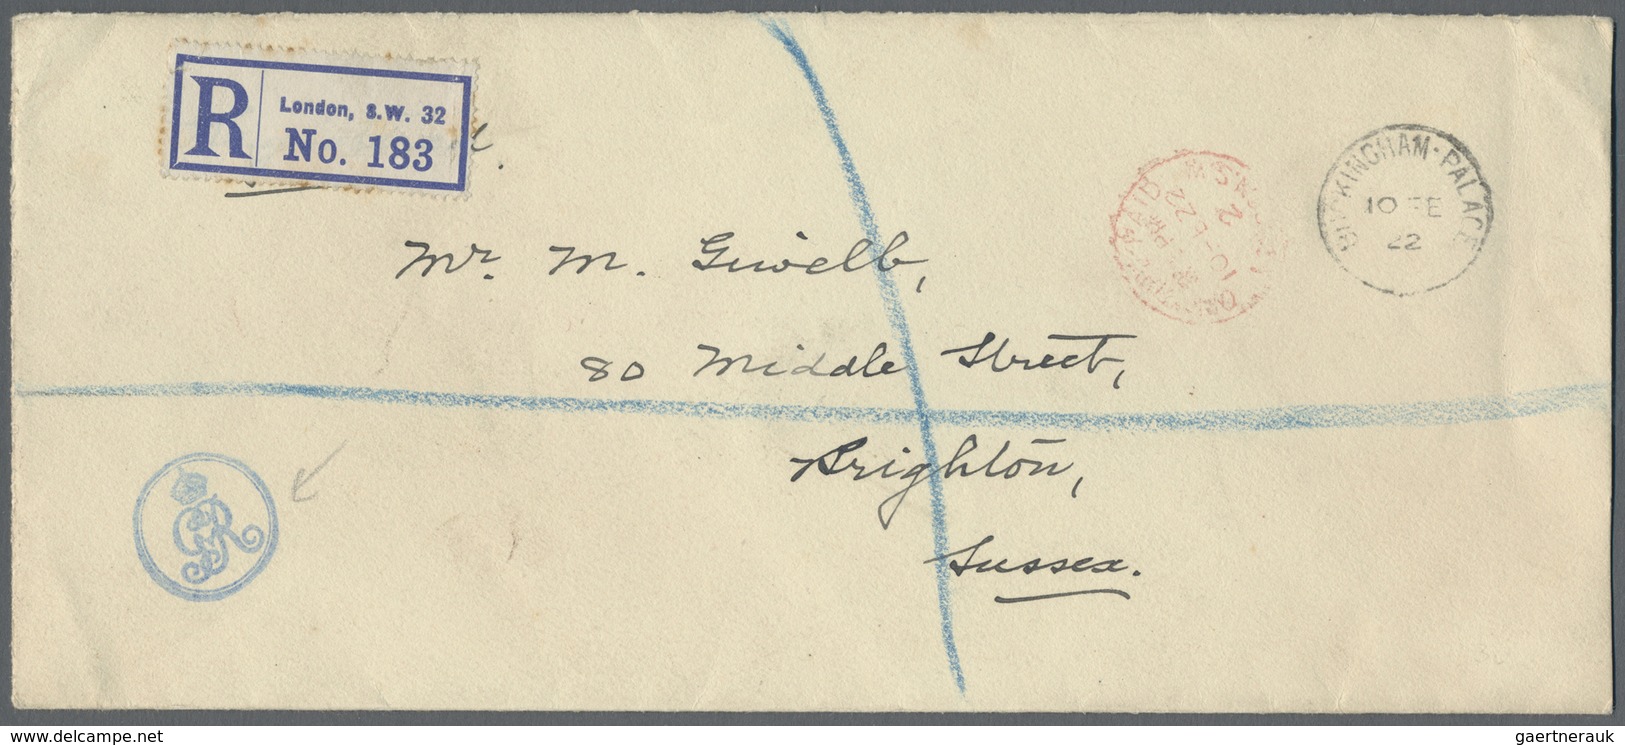 Br Großbritannien - Besonderheiten: 1903/1991: 36 letters only with OFFICIAL PAID cancellations.